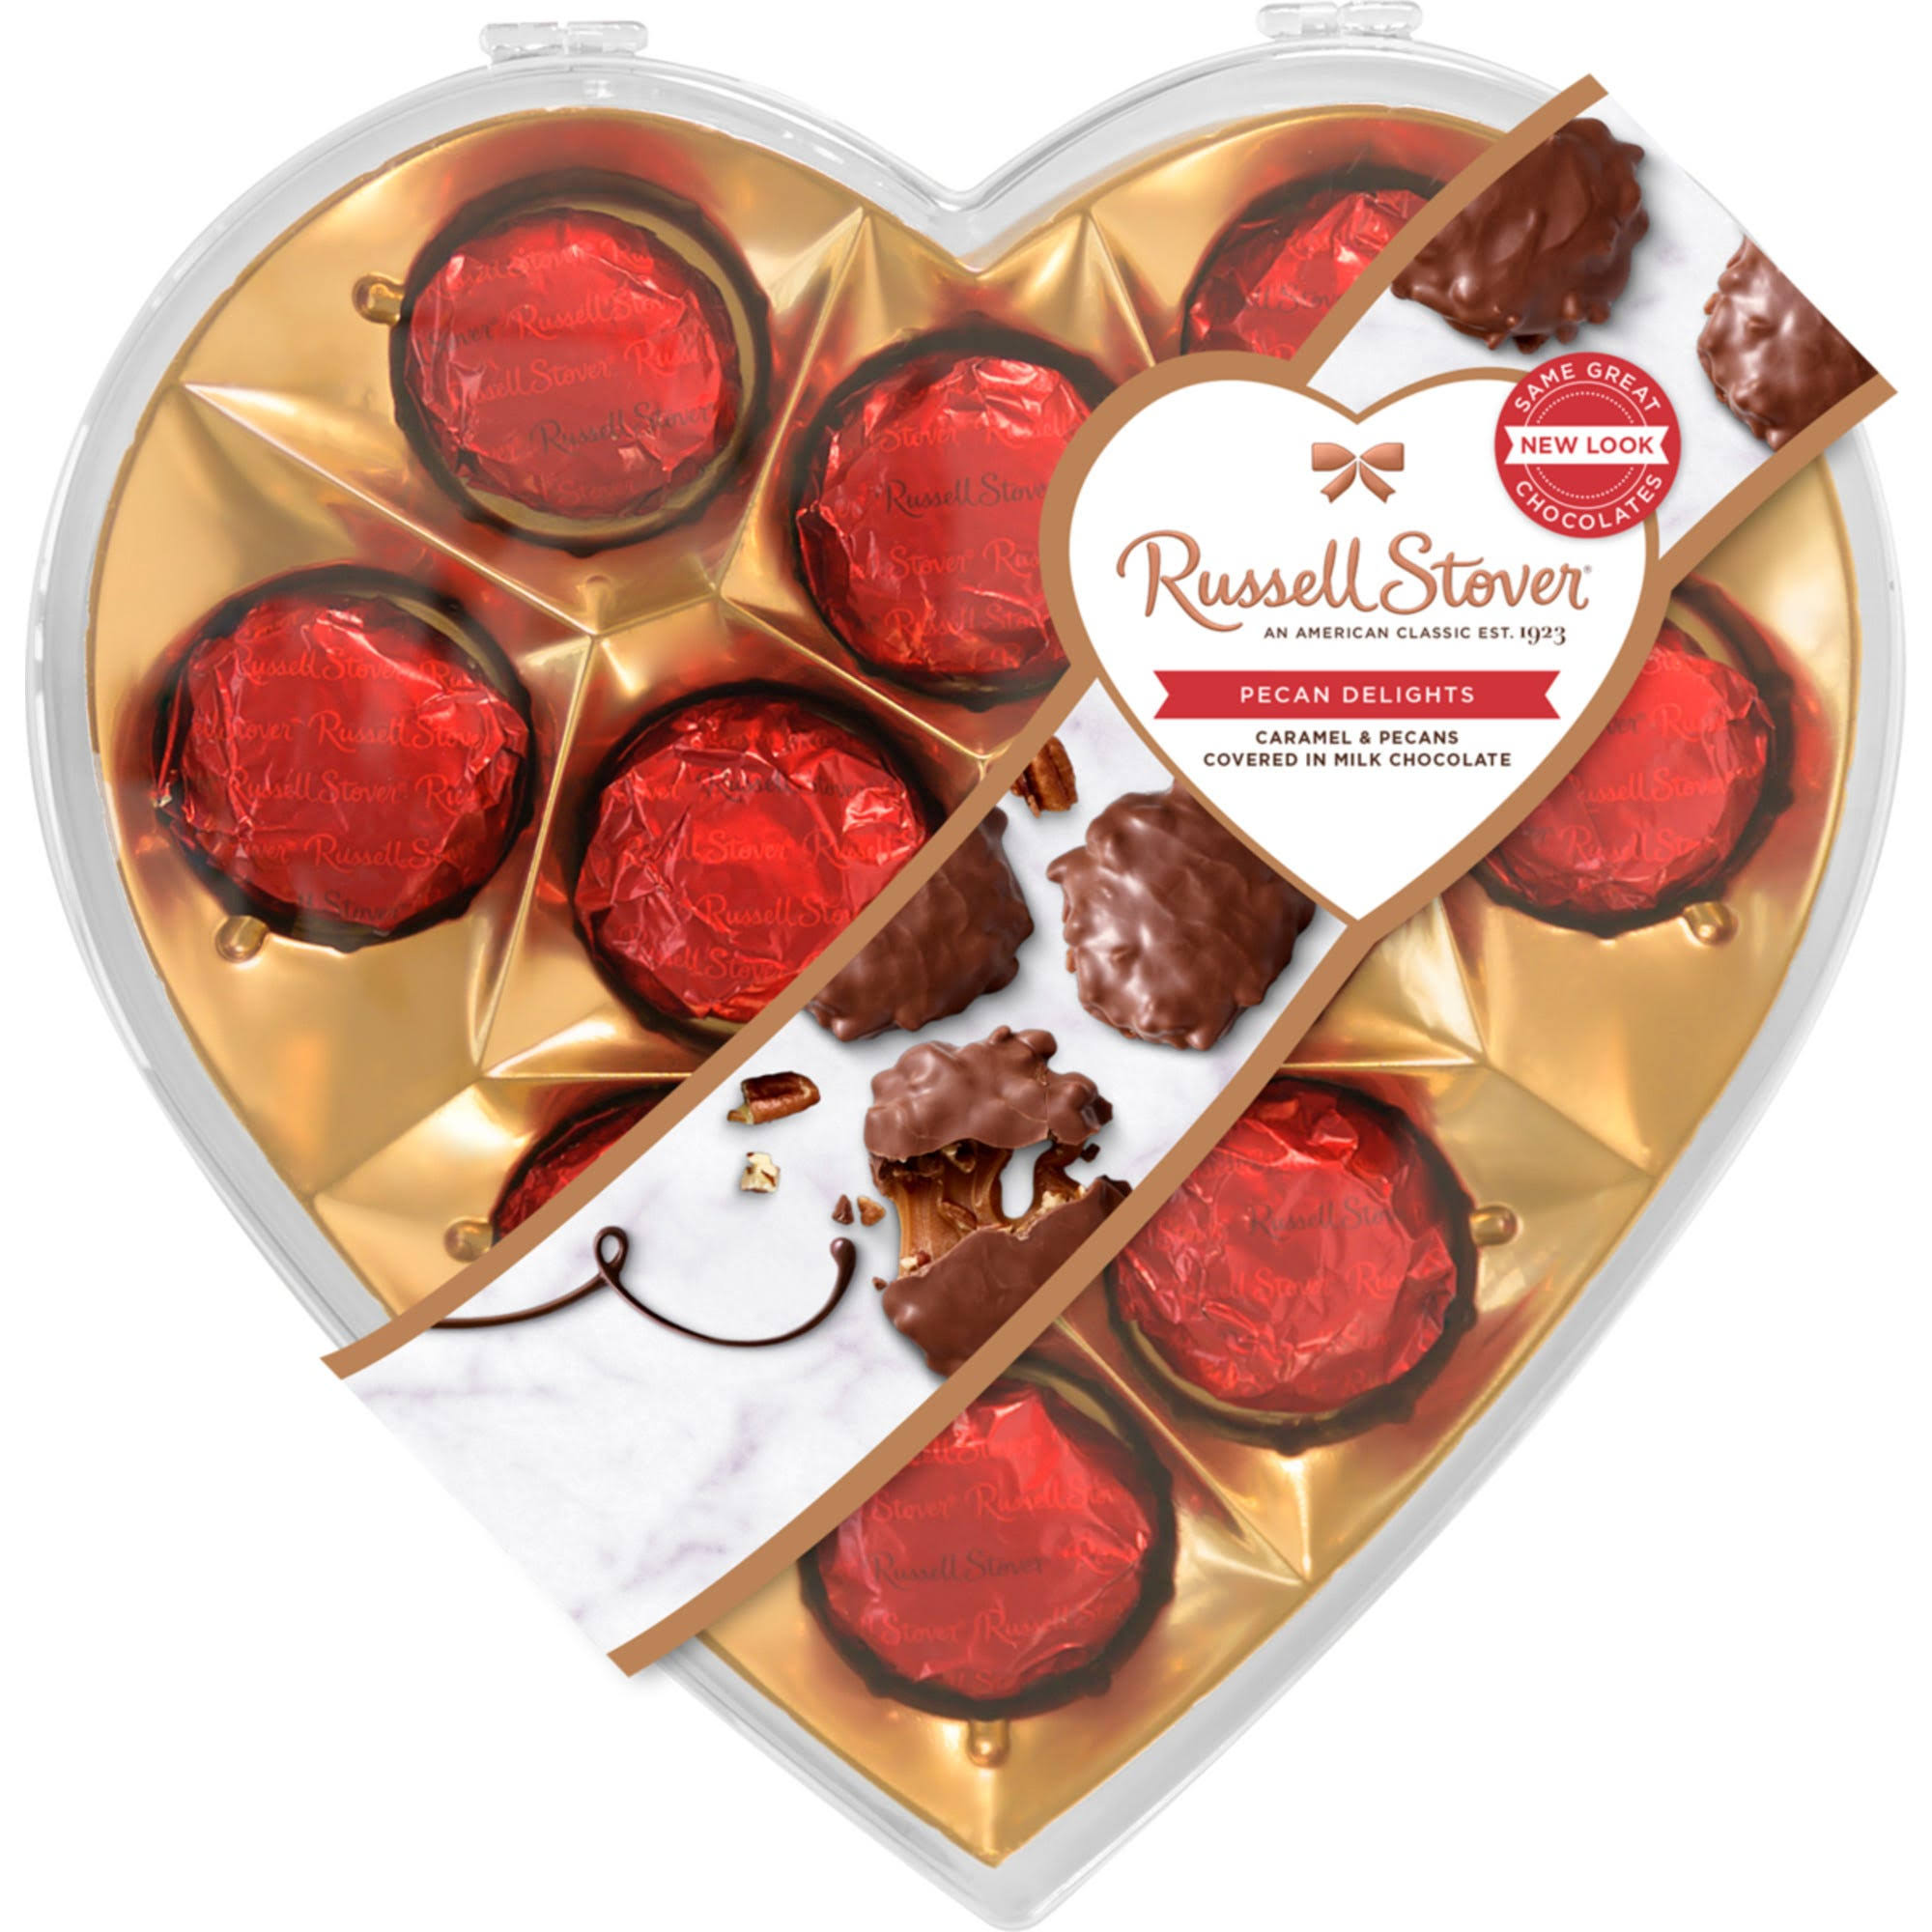 Russell Stover Pecan Delights Caramel & Pecans Covered in Milk Chocolate - 8.8 oz